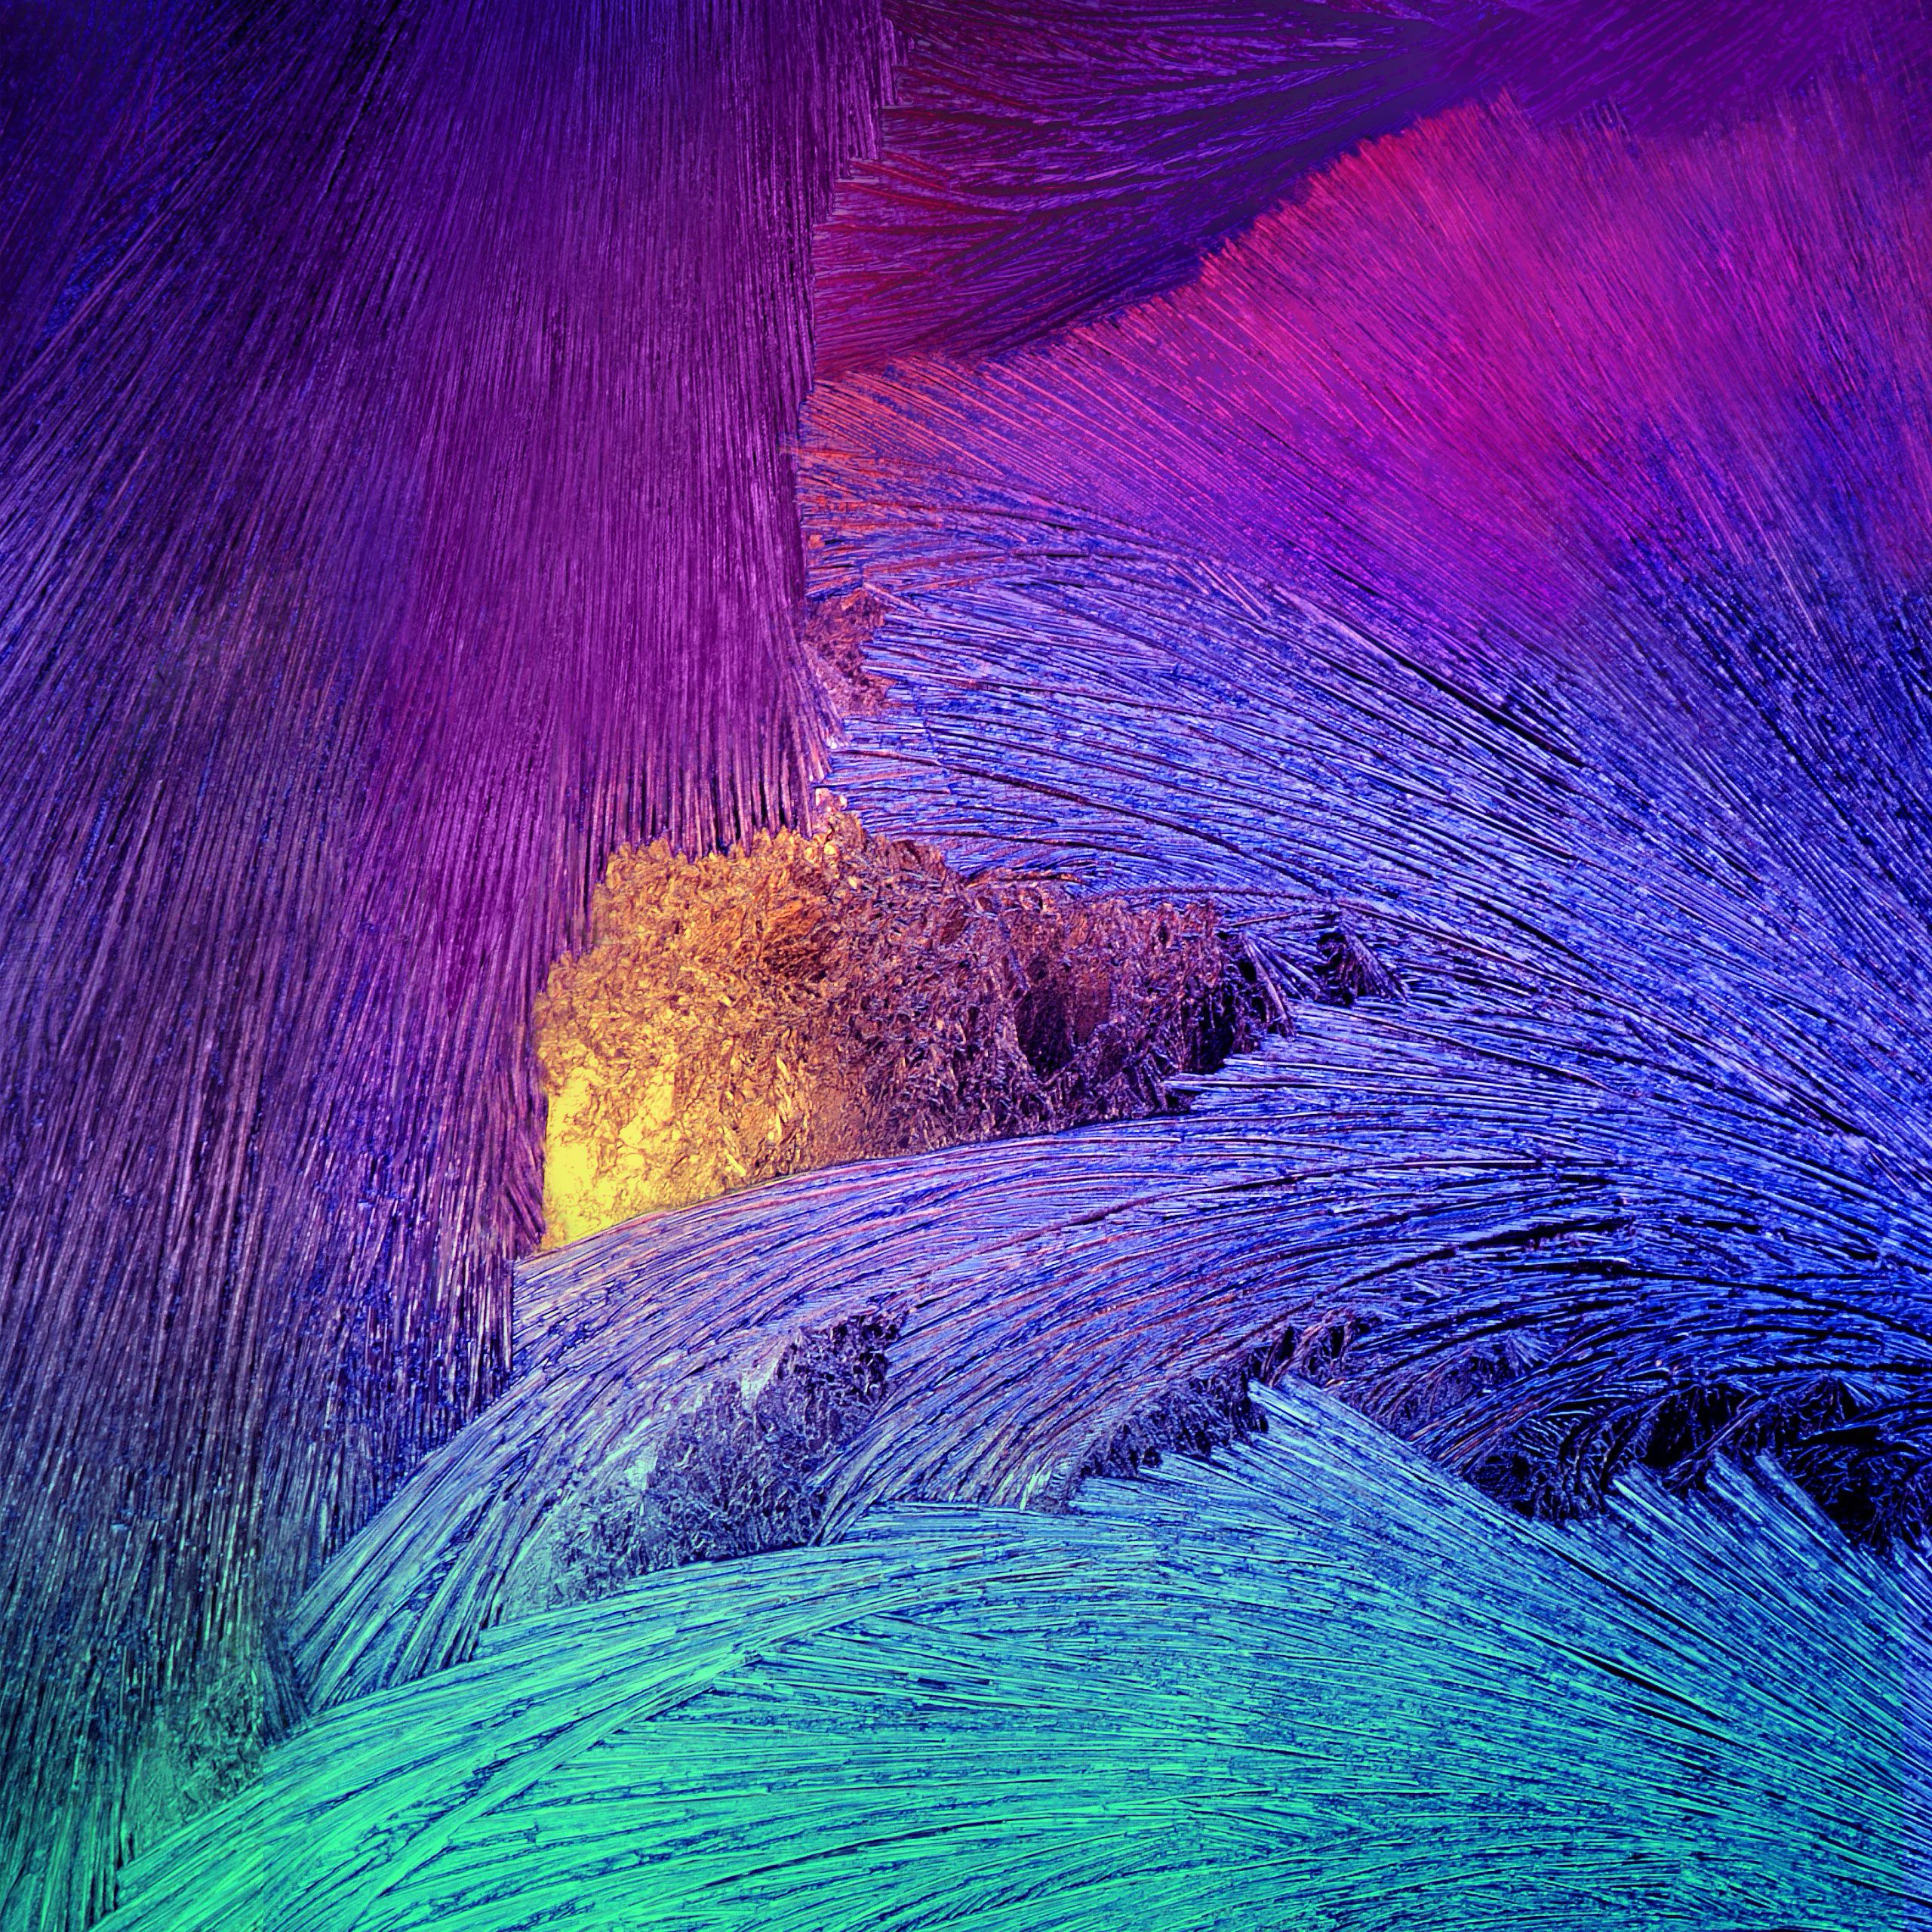 Wallpaper For Galaxy Note 3 Wallpapers